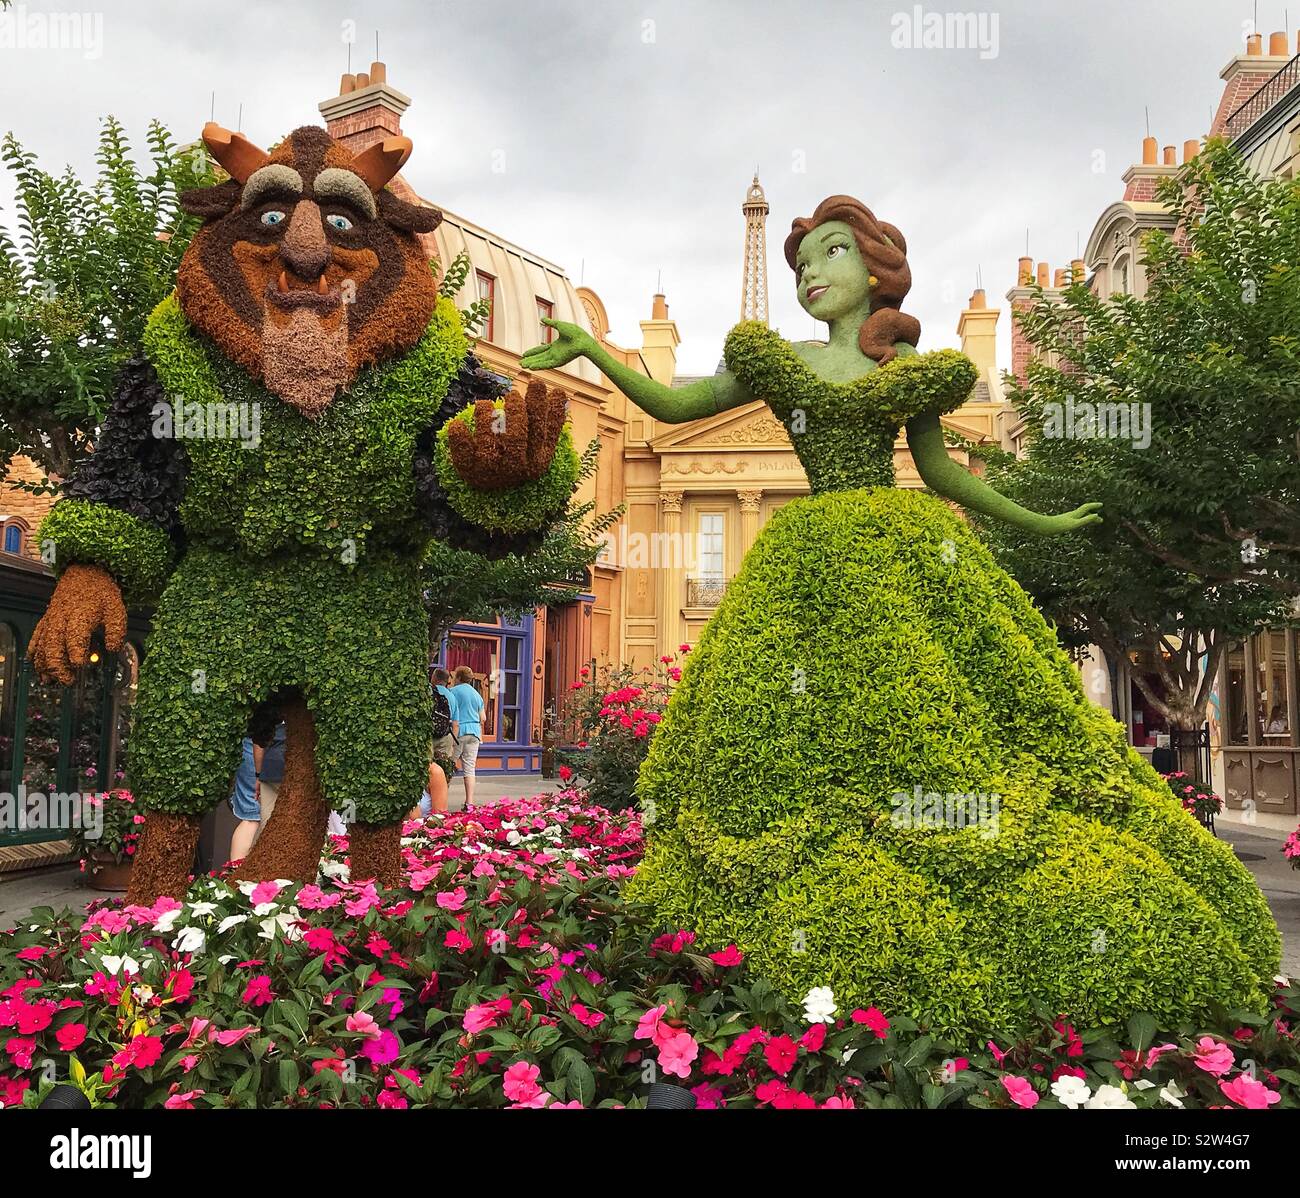 Epcot 2019 Flower and Garden Festival Orlando, Florida  - Beauty and the Beast Topiary Stock Photo